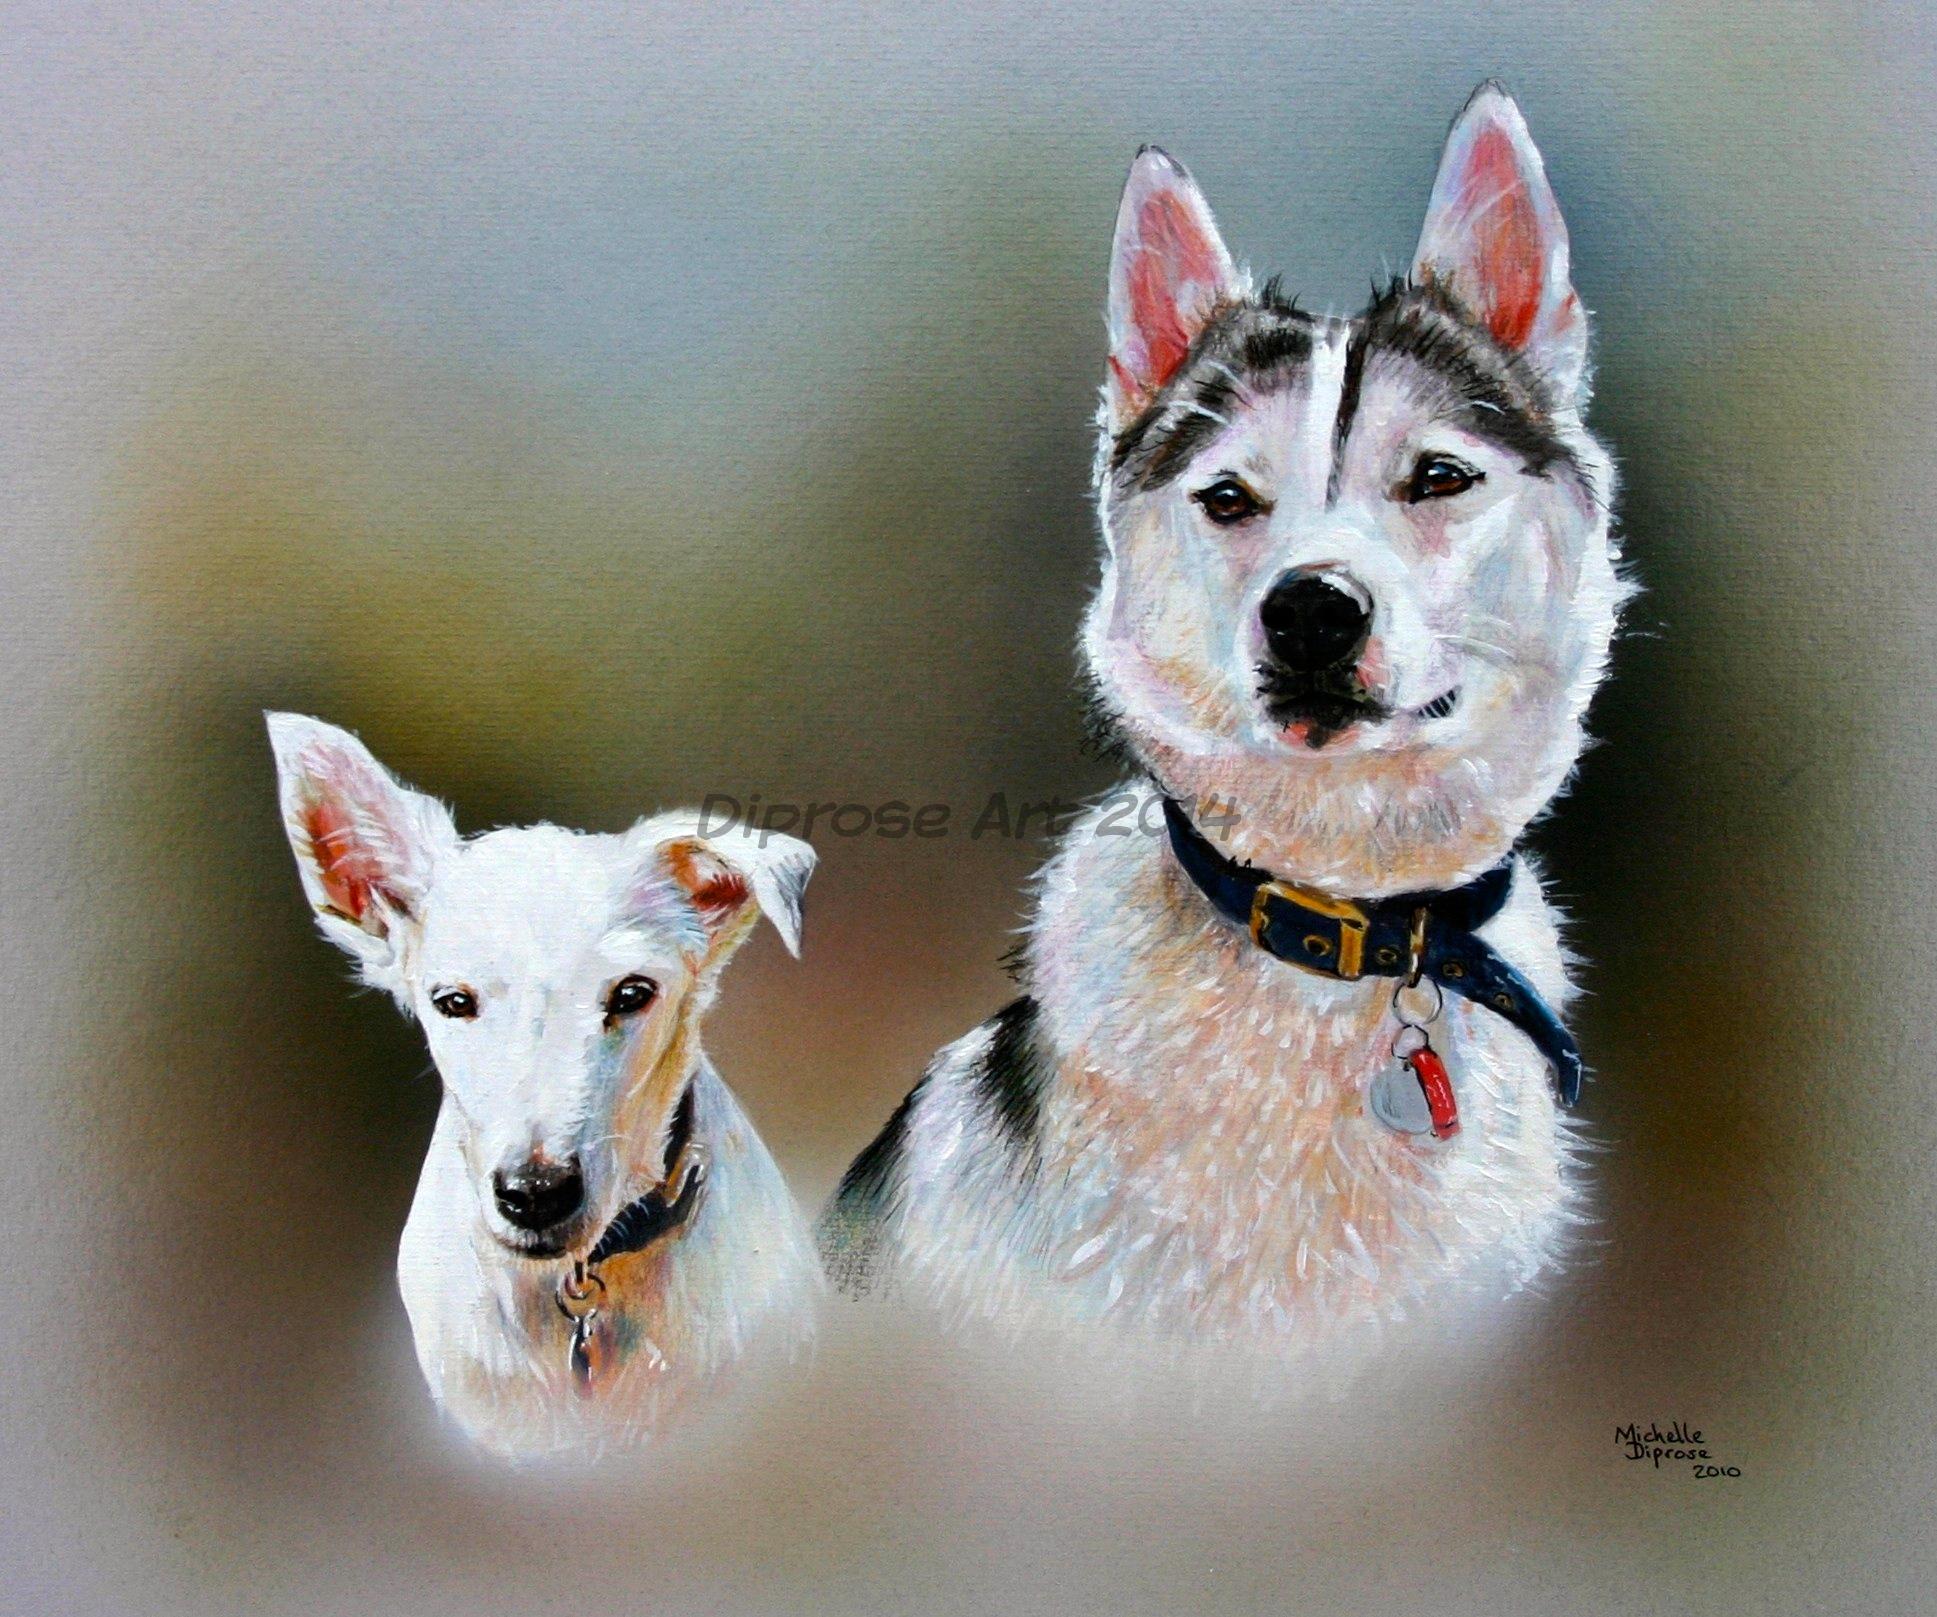 Acrylics on board - approx A3 - pet dog portrait - This pair of rascals were very different in size to each other.